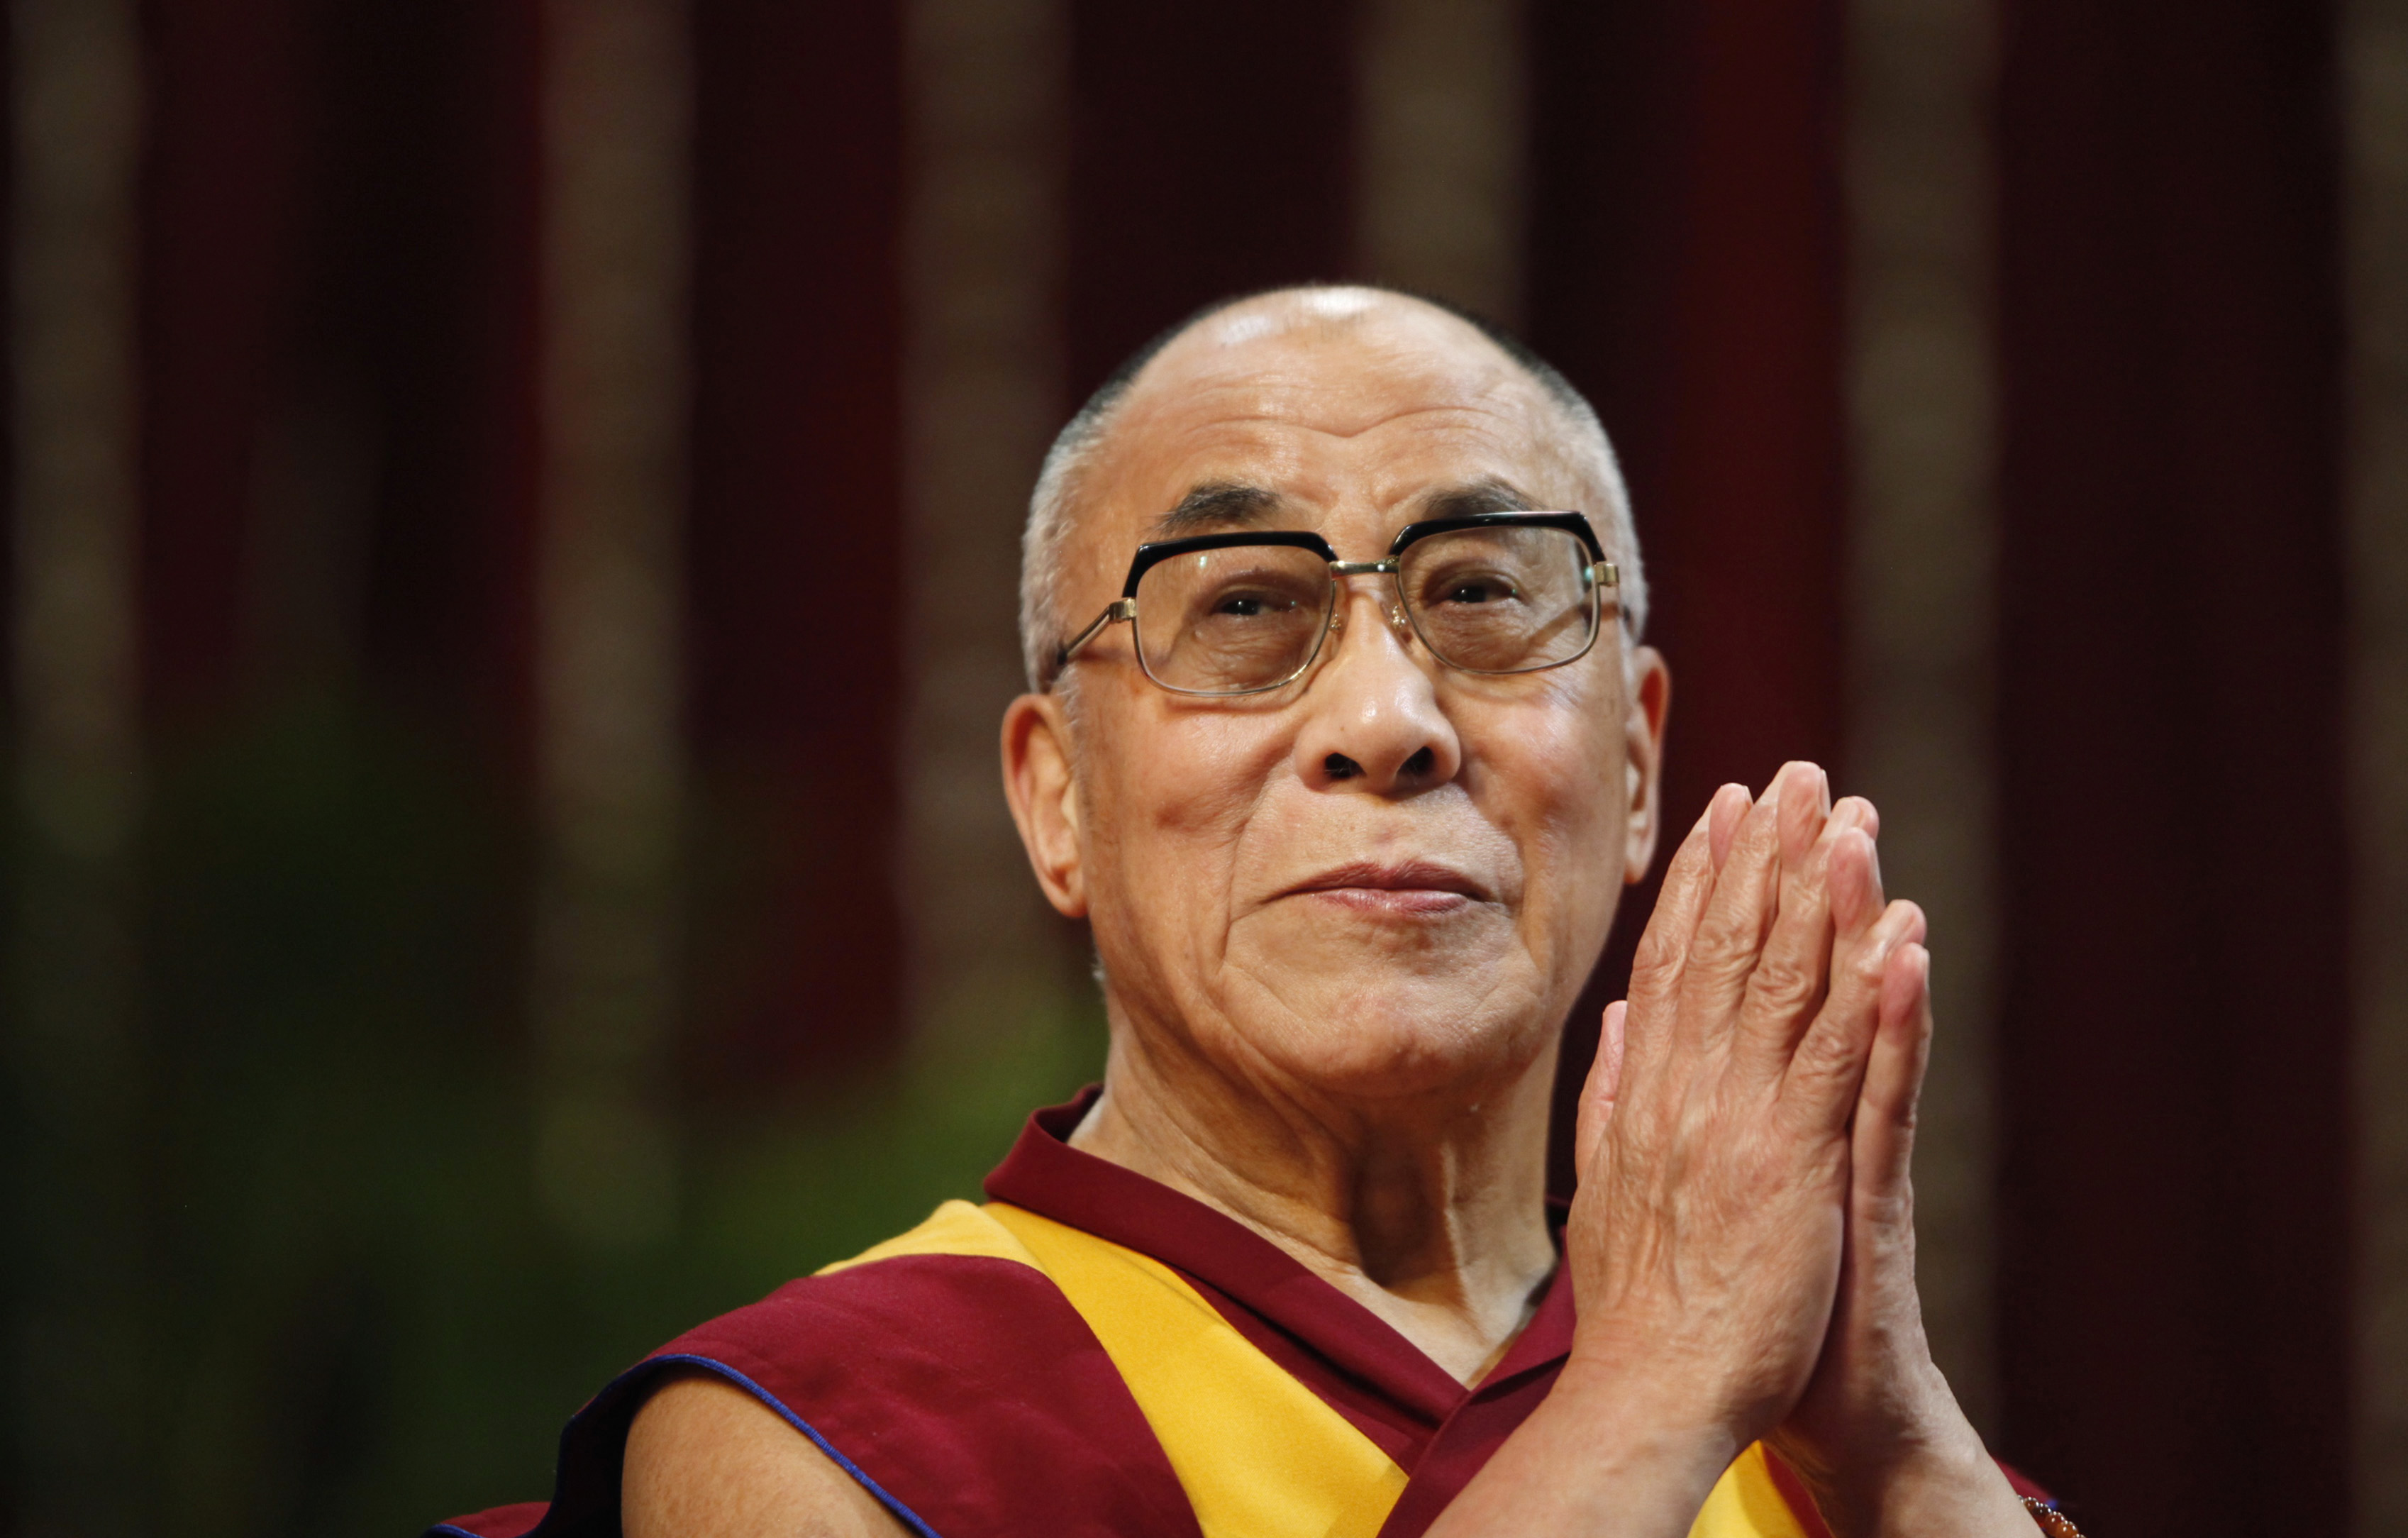 His Holiness the 14th Dalai Lama, please speak out against the brutal dog meat trade.